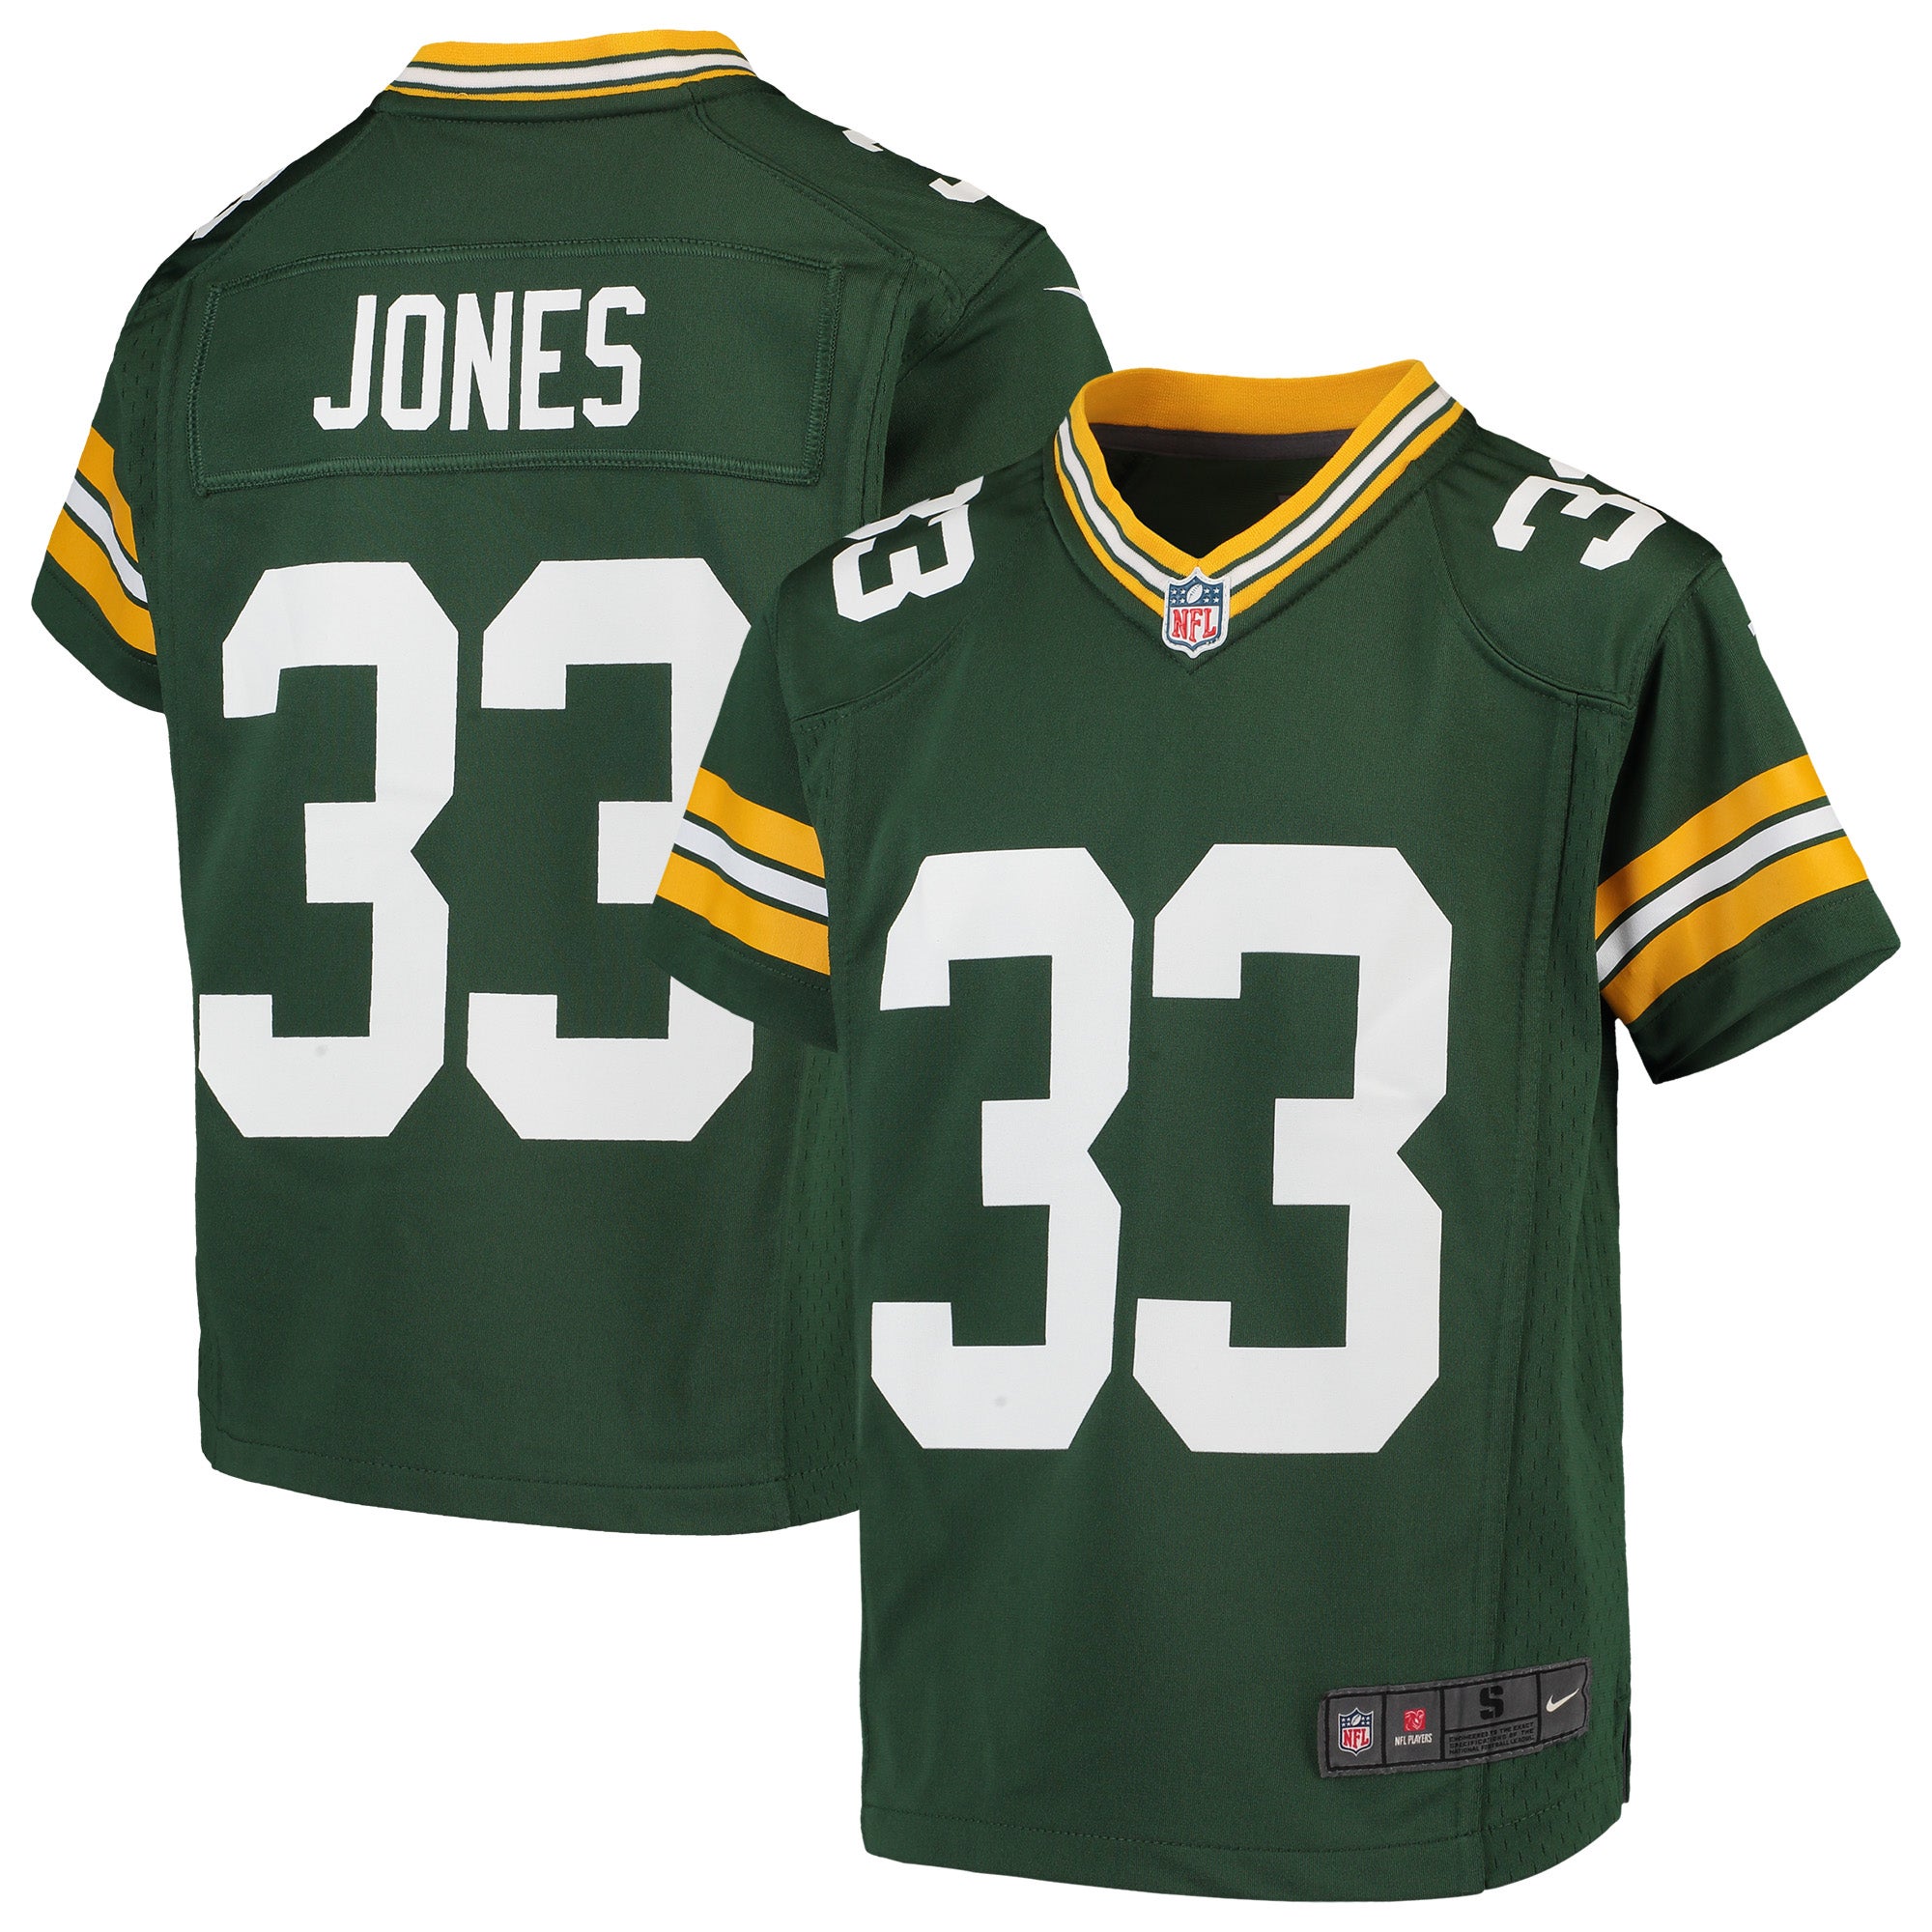 Nike Packers Team Color Game Day Jersey - Boys' Grade School